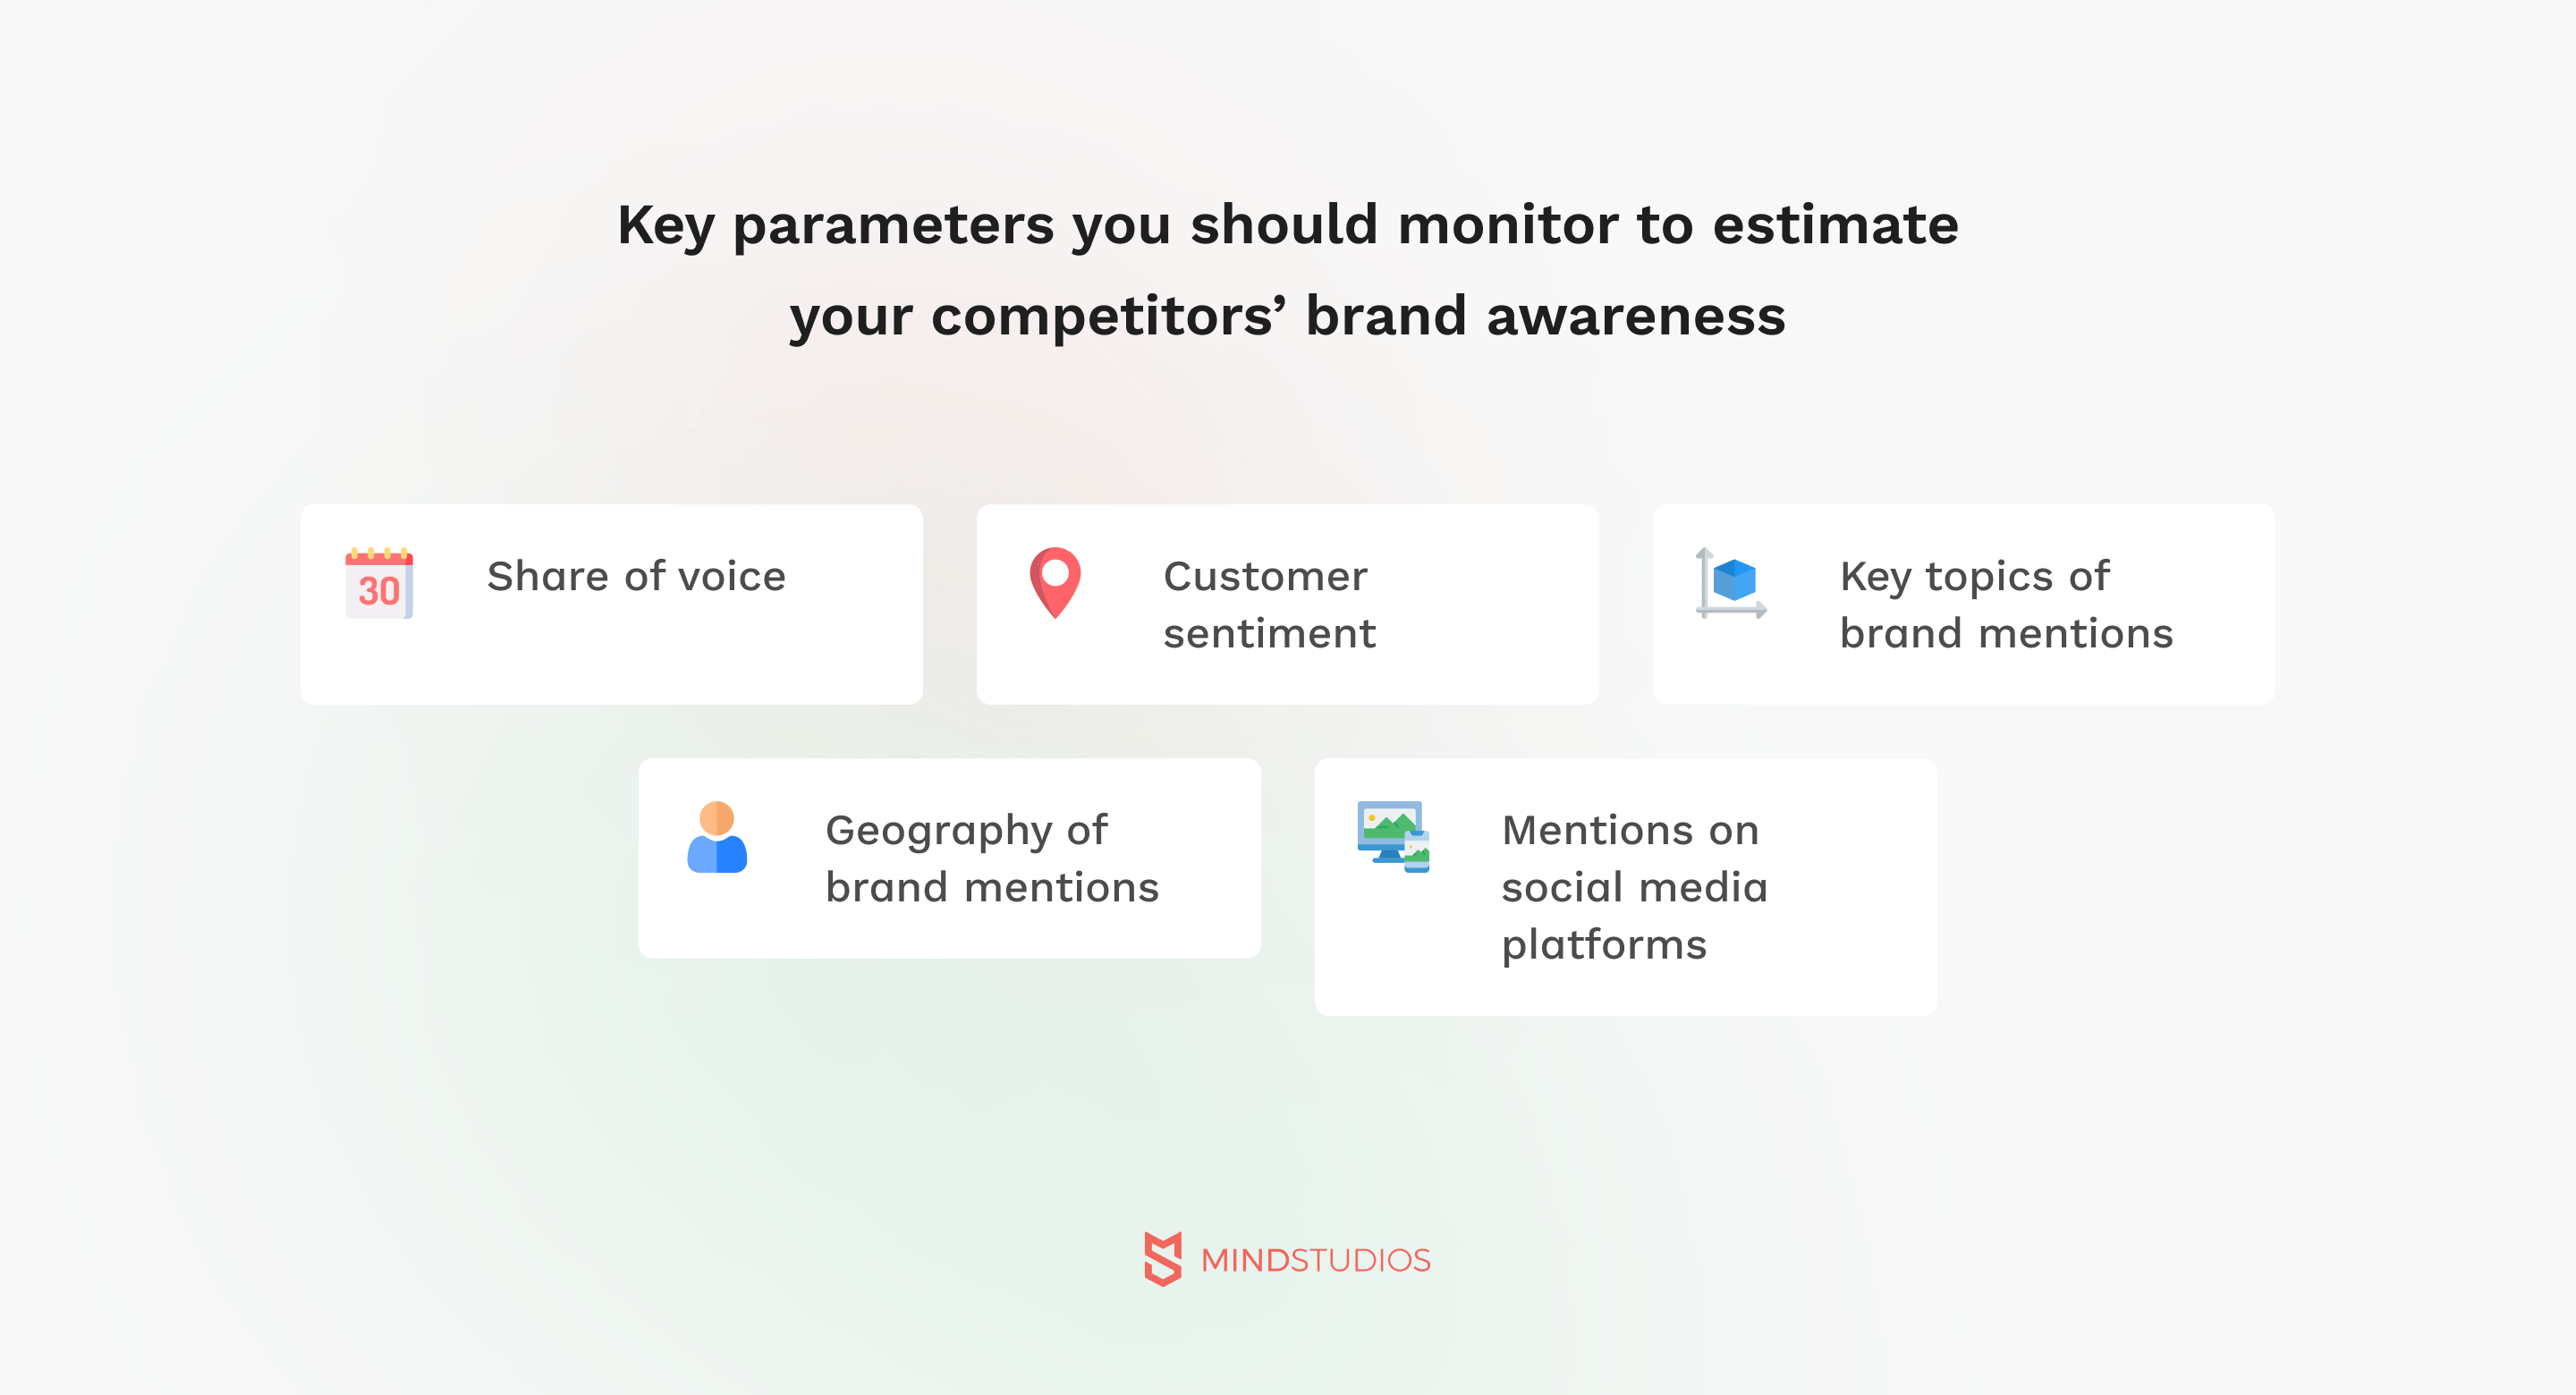 Key parameters you should monitor to estimate your competitors’ brand awareness